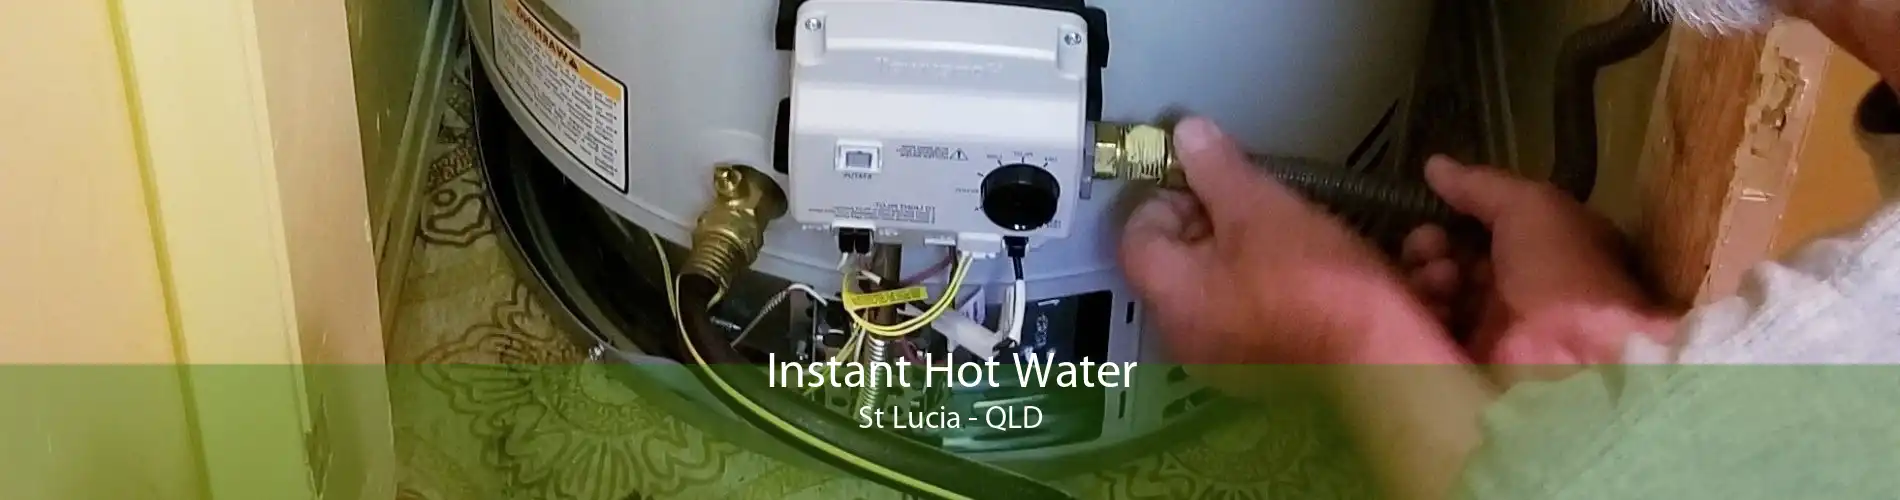 Instant Hot Water St Lucia - QLD